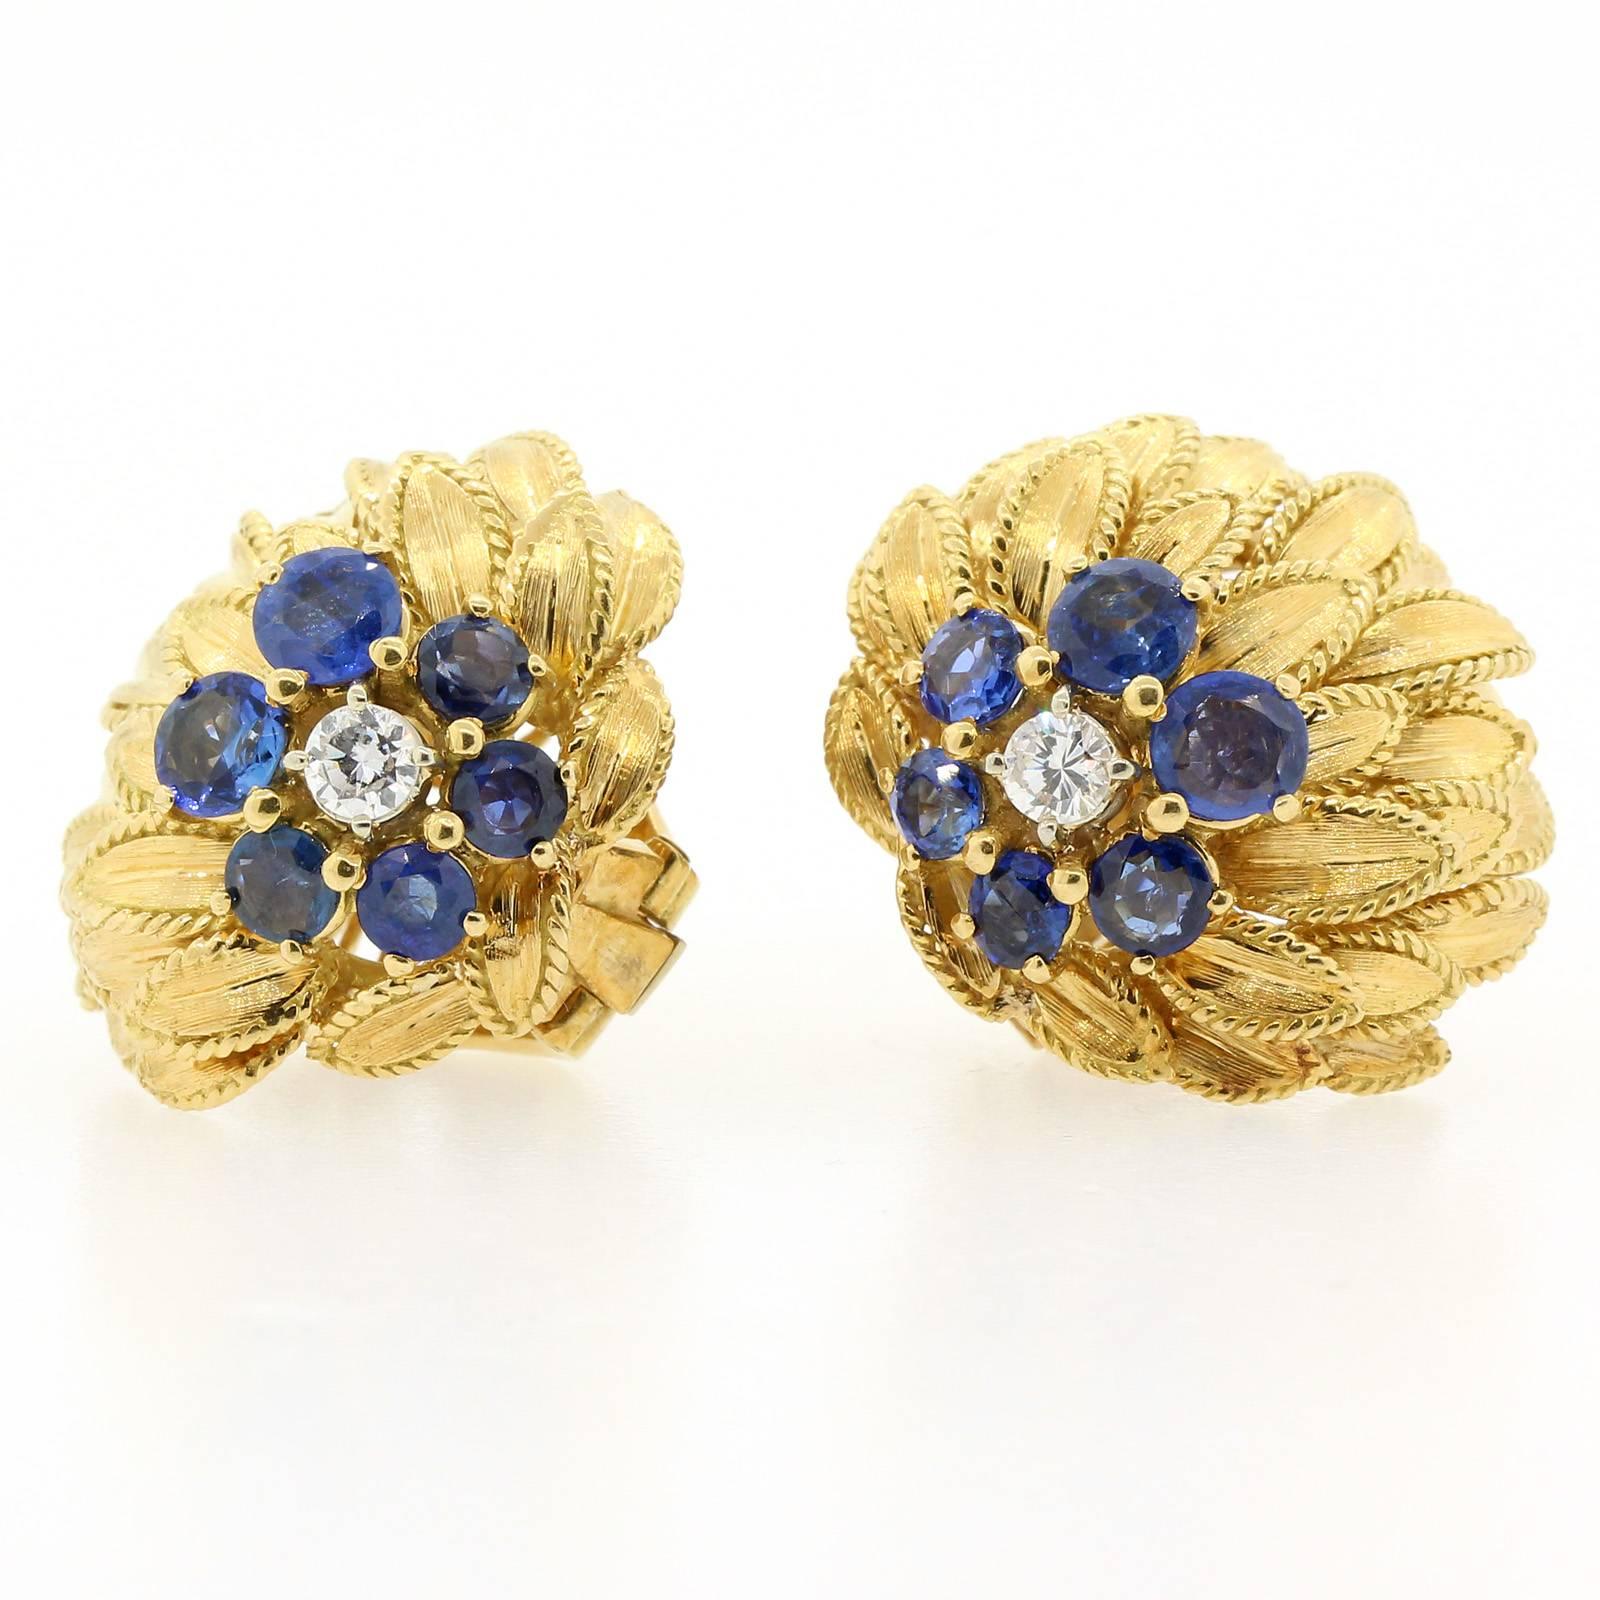 Vintage Sapphire & Diamond Earrings.  The earrings are fabricated in 18KT yellow gold as  a cluster of overlapping  leaves.  Each centering a pistil of one Round Brilliant Cut Diamond surrounded by seven Round Blue Ceylon Sapphires.  All